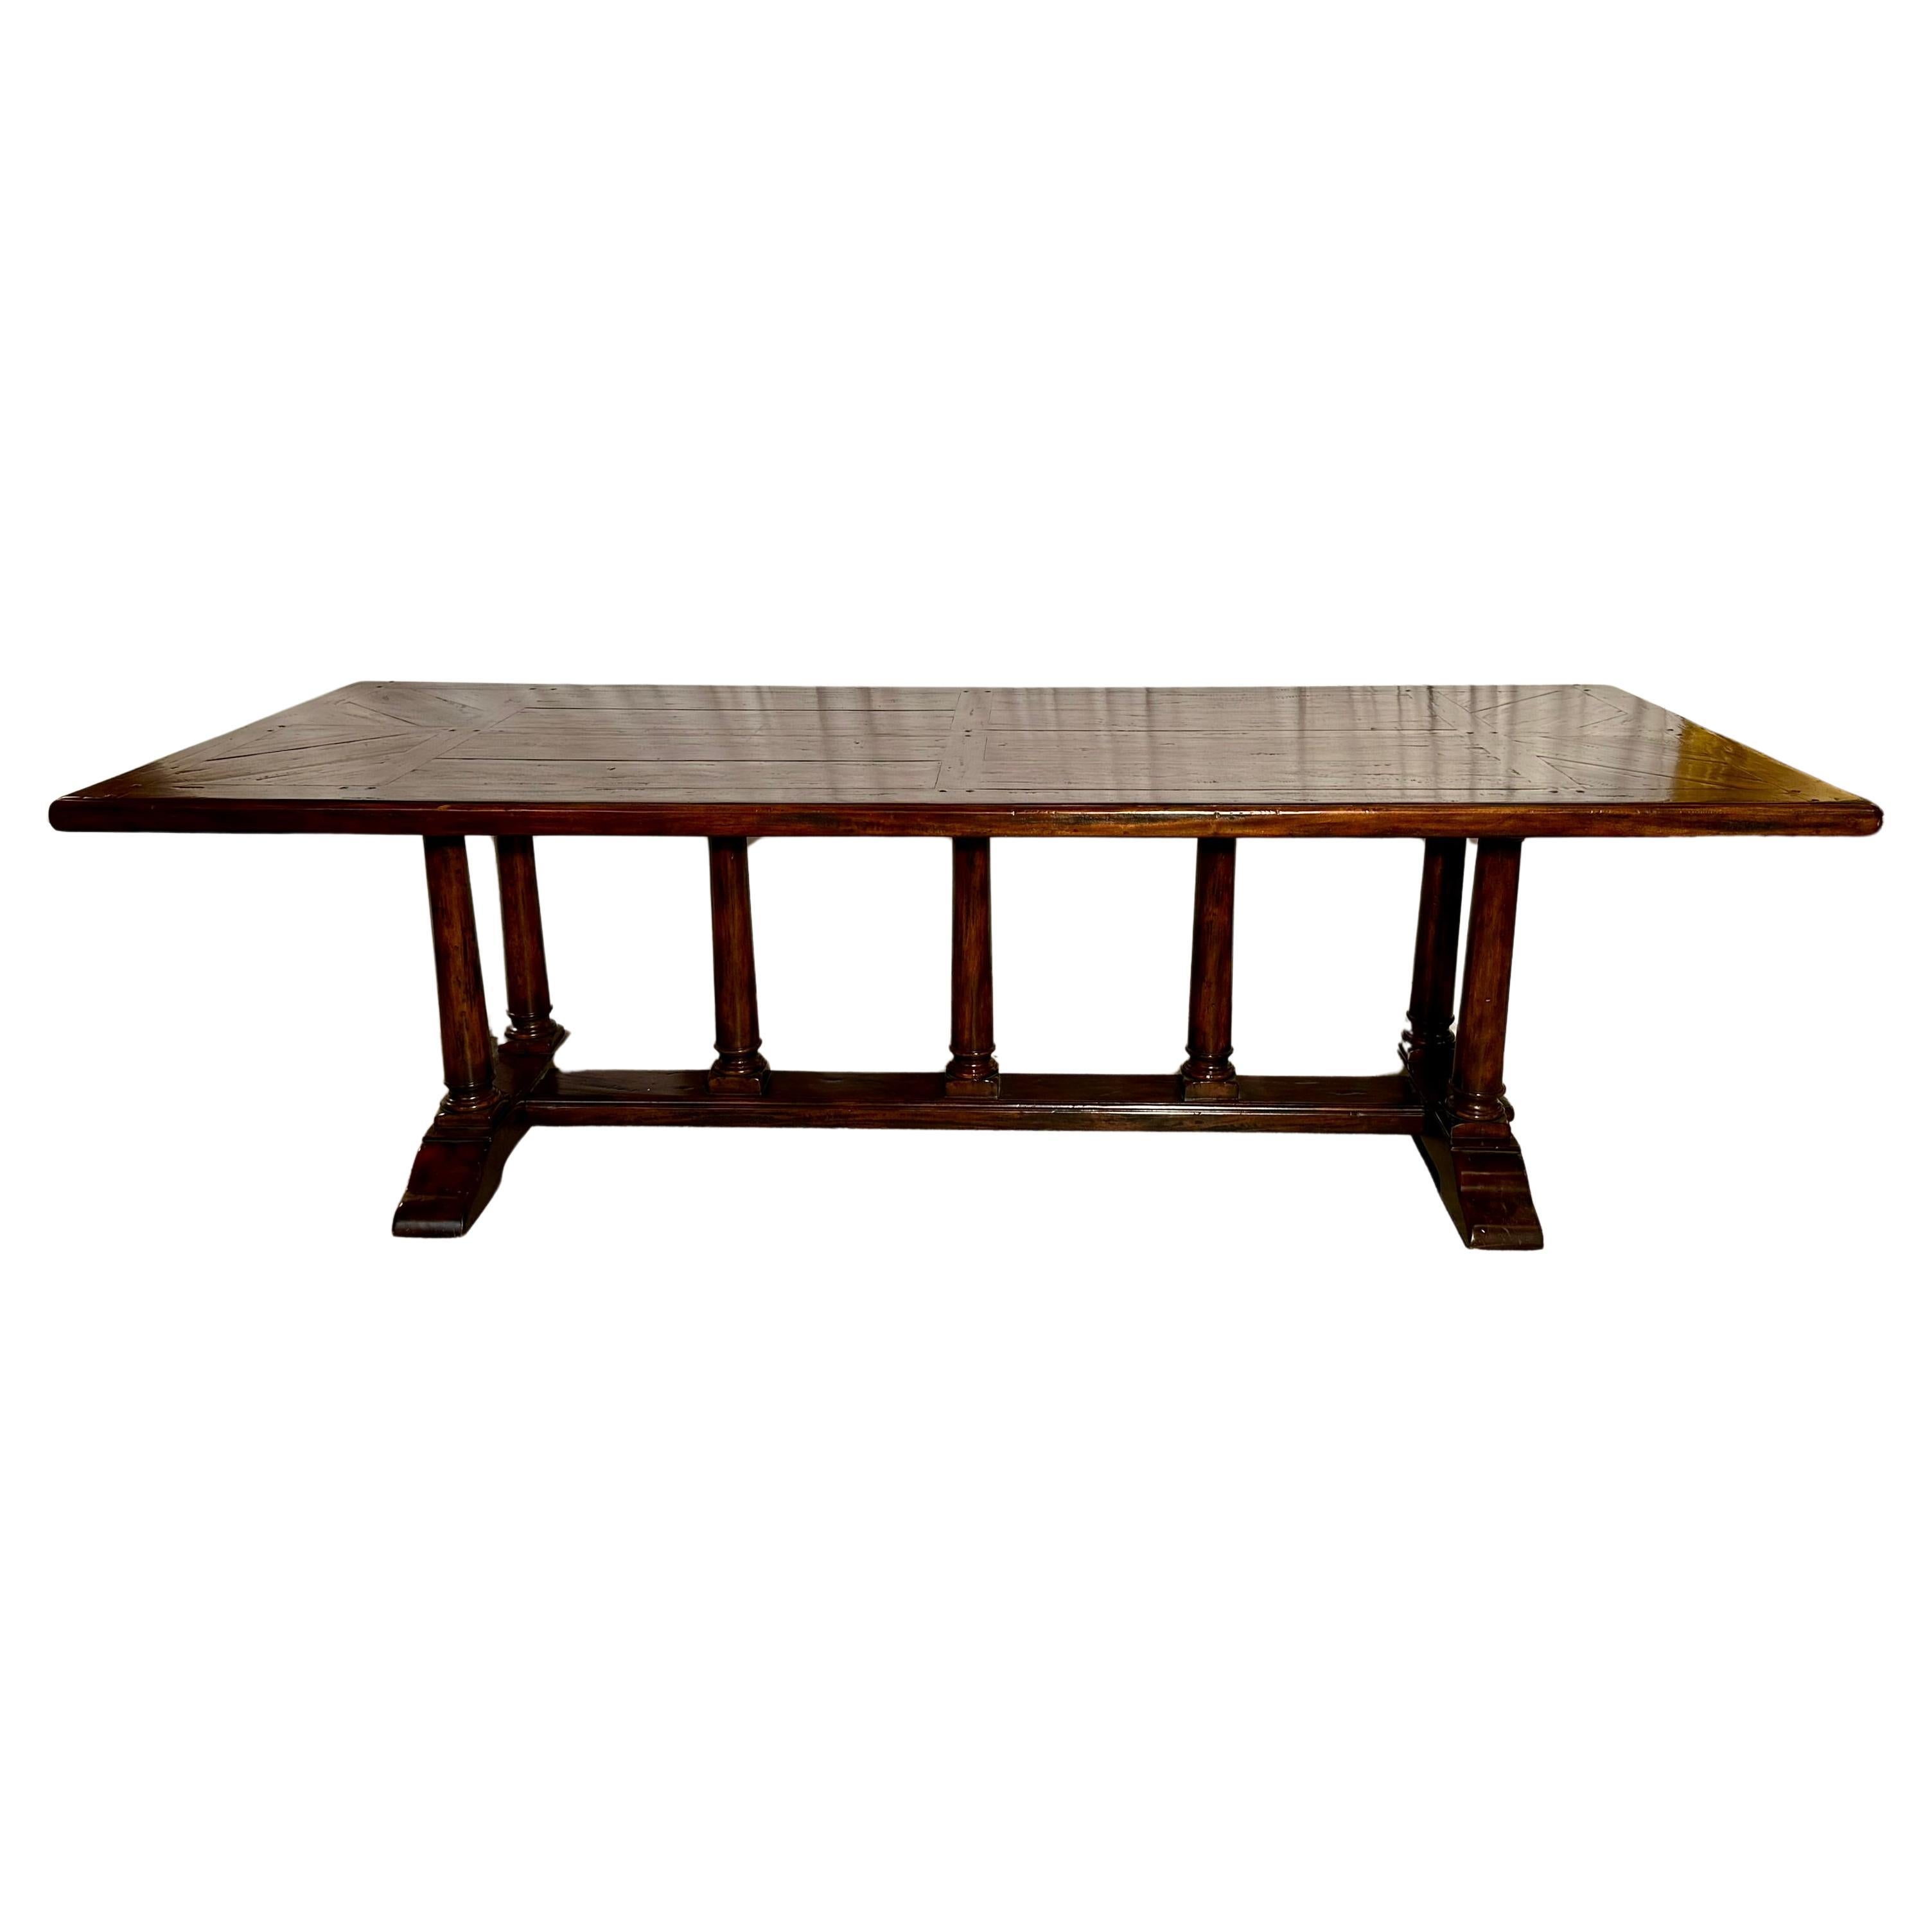 Antique English Yew Wood Trestle Table, Circa 1900. For Sale